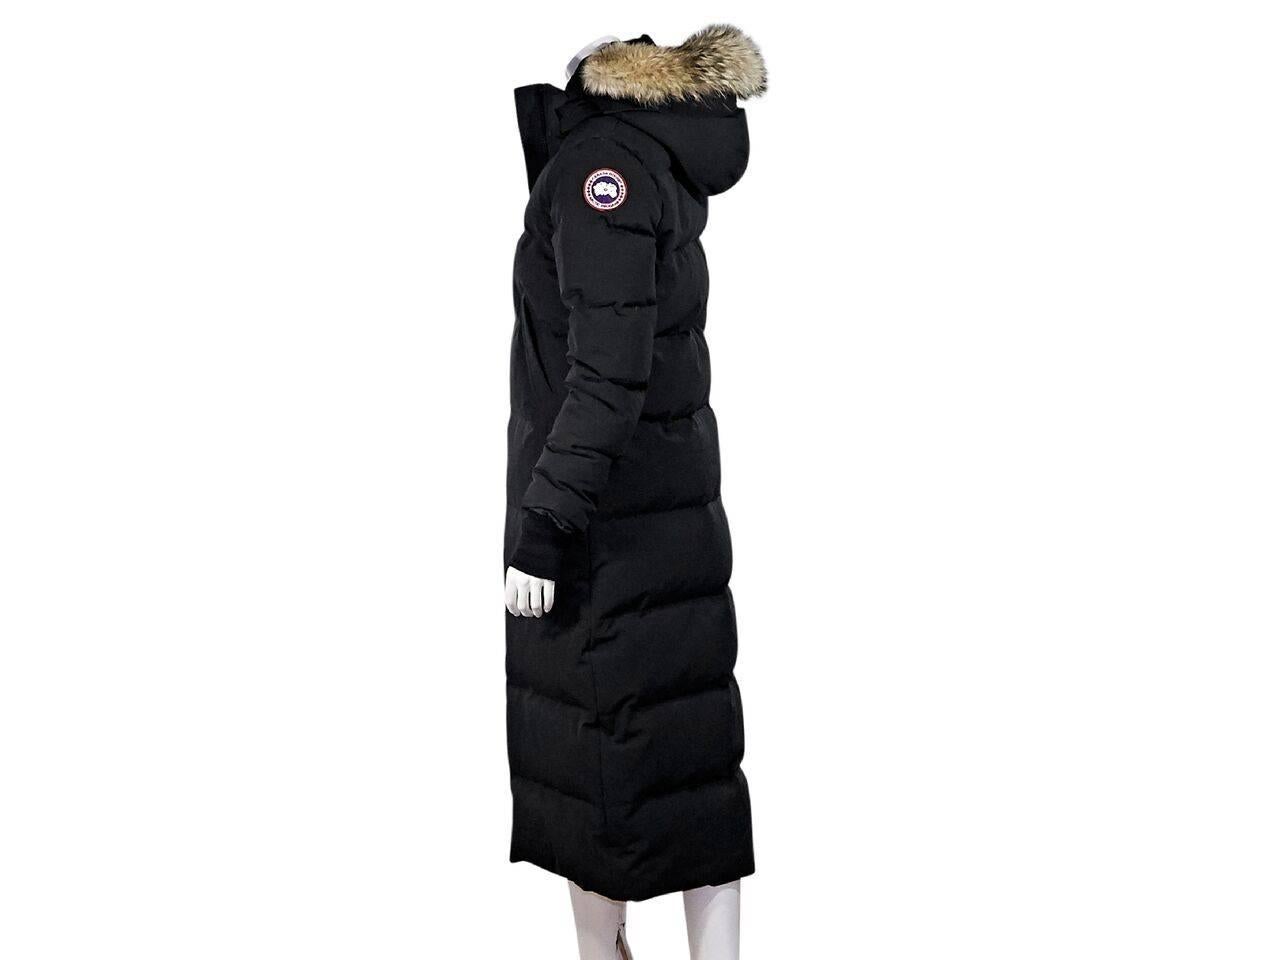 Product details:  Long black parka by Canada Goose.  Detachable fur-trimmed hood.  Long sleeves.  Ribbed cuffs.  Zip-front closure.  Waist slide pockets.  
Condition: Pre-owned. Very good.
Est. Retail $ 995.00